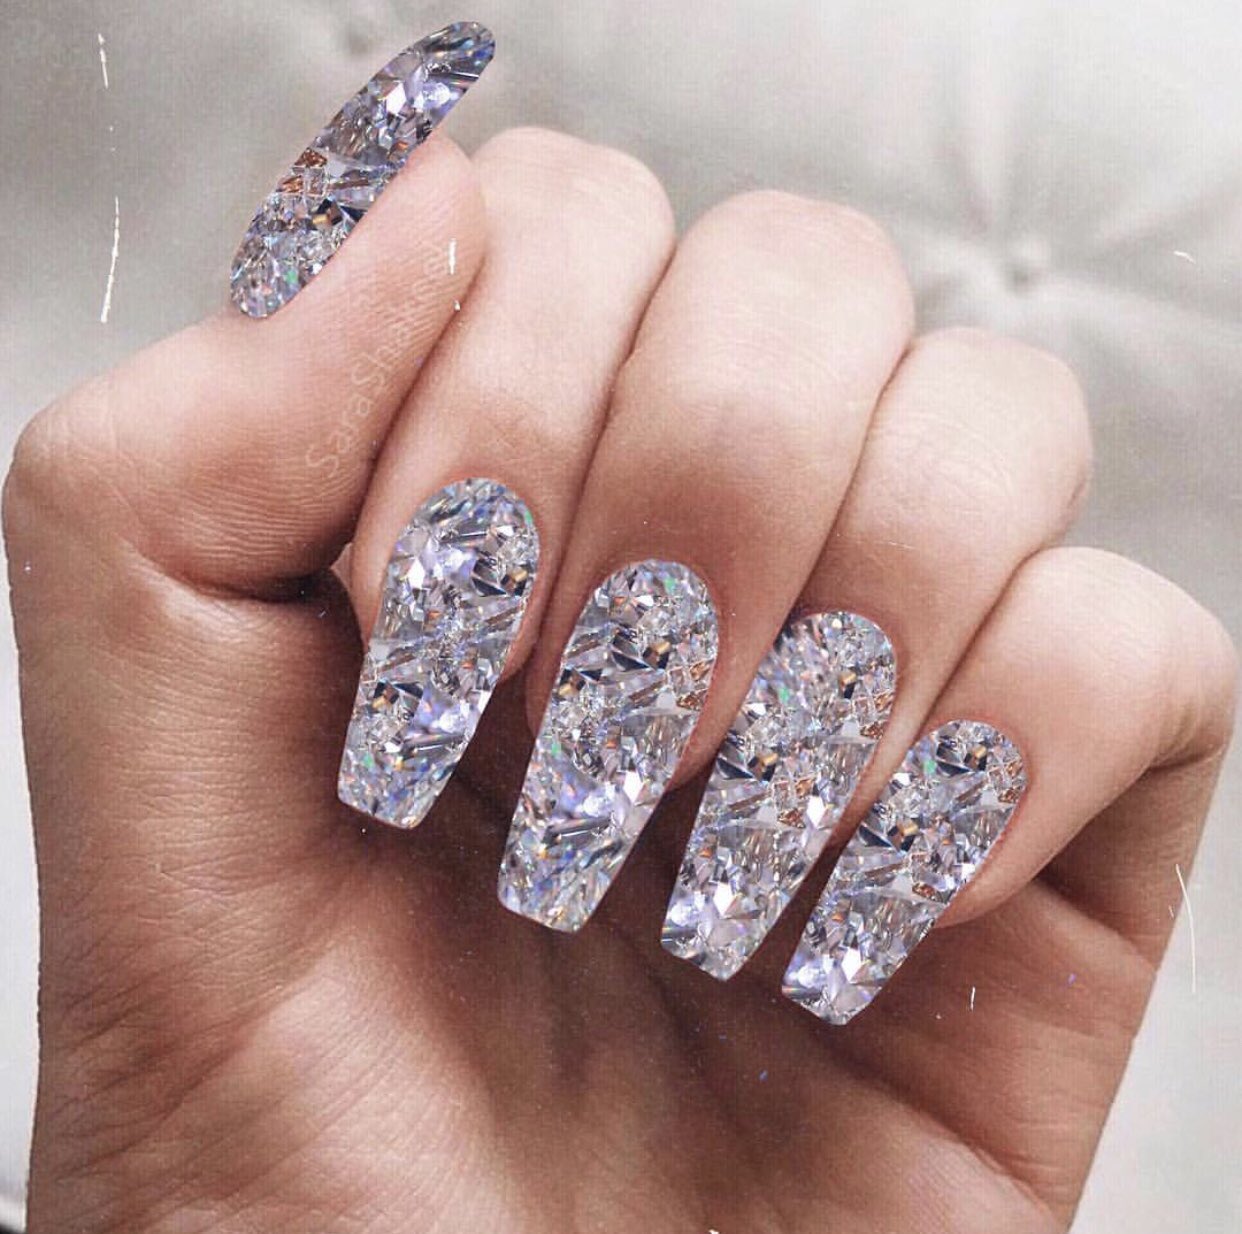 MARMALADE on X: 🤤Drooling🤤over these DIAMOND NAILS by @sarashakeel  💎💍💅#Diamonds #nails #sparkly #omg #amazing #manicure   / X